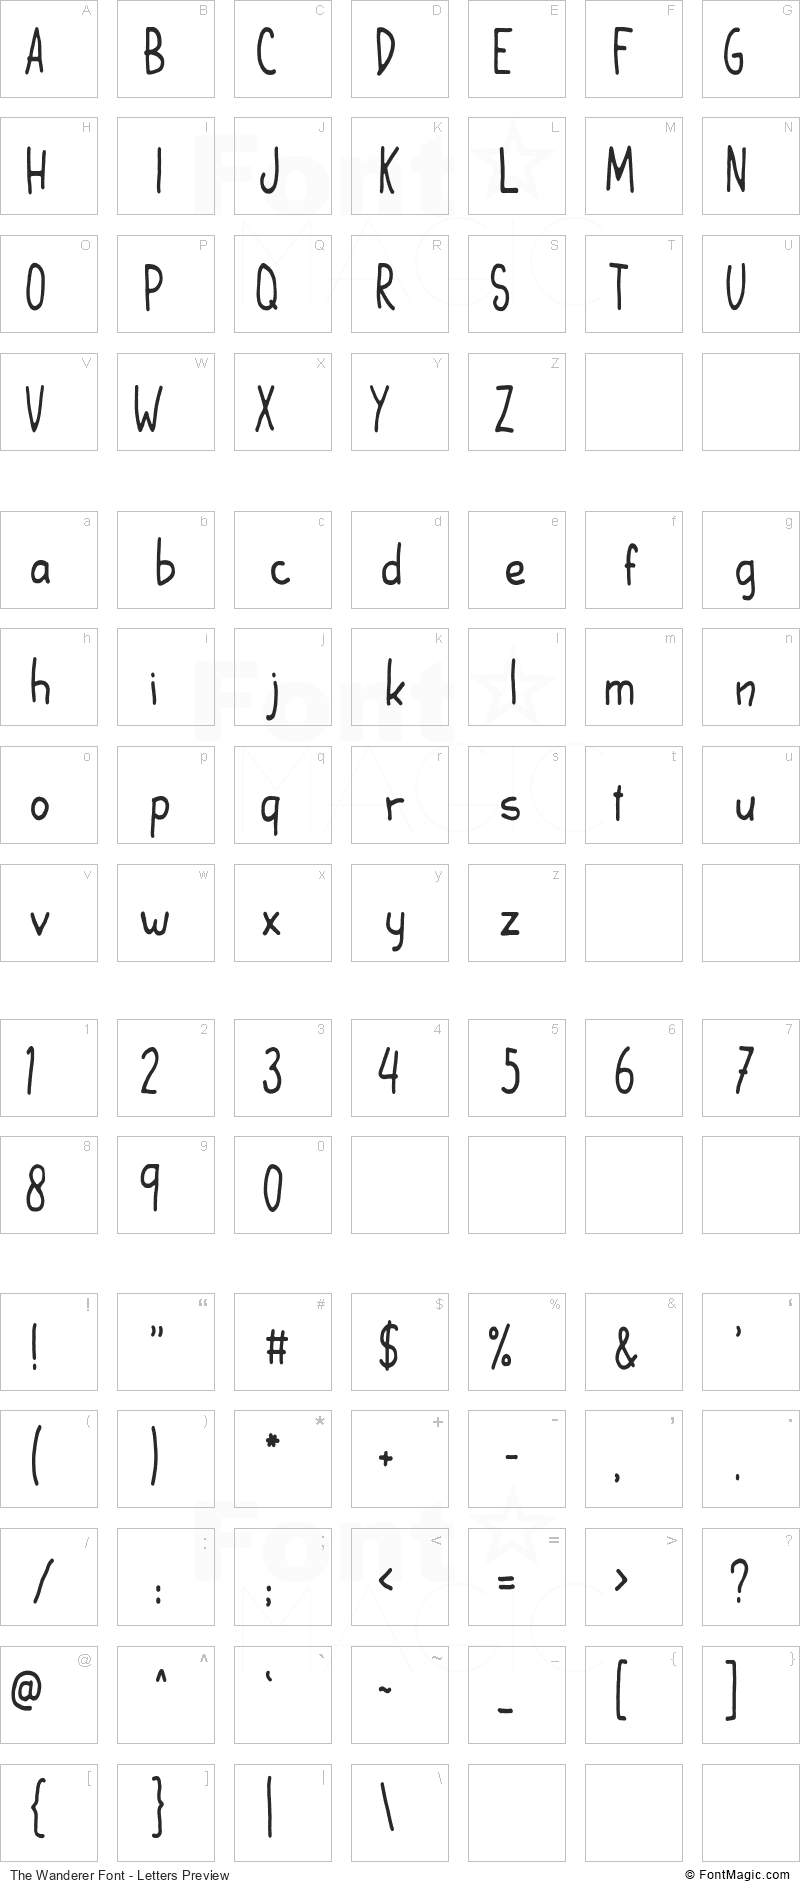 The Wanderer Font - All Latters Preview Chart